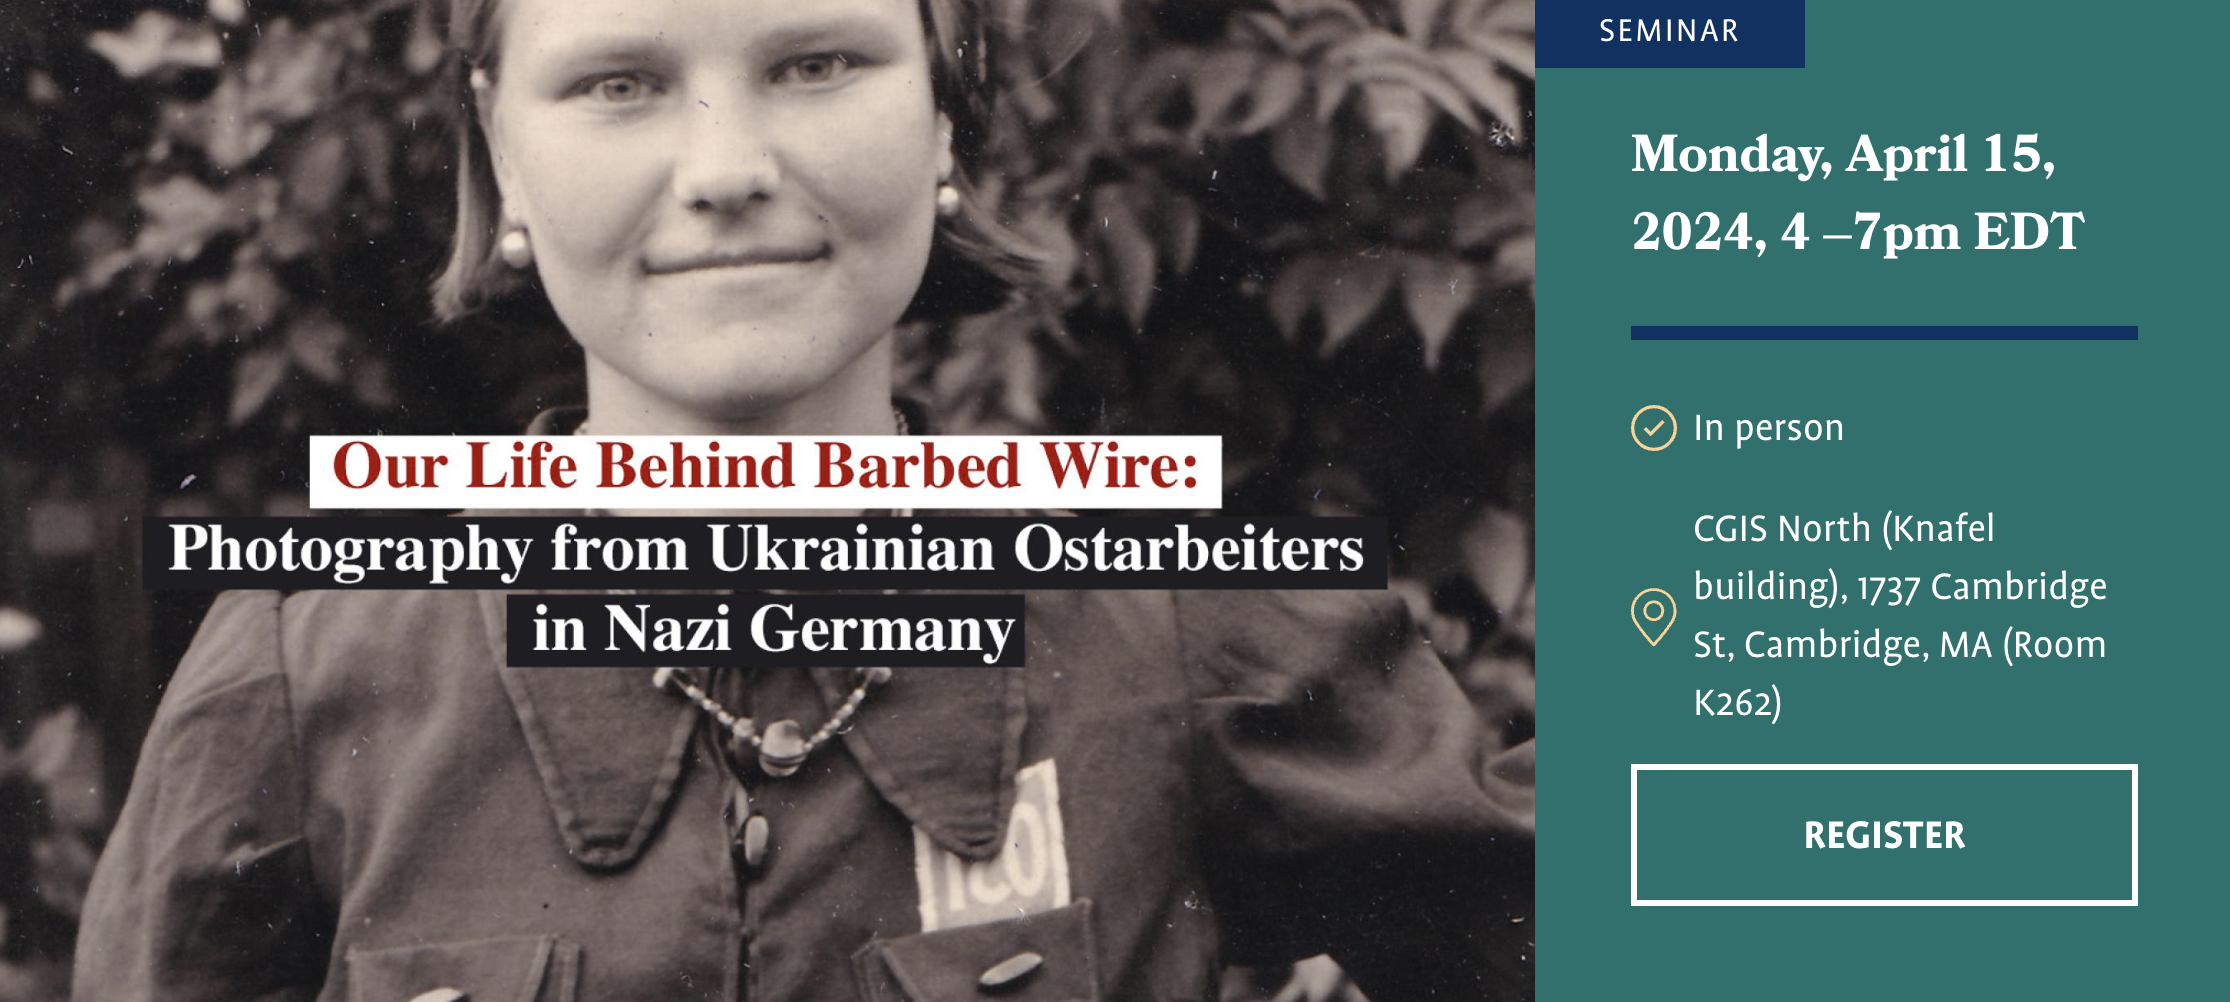 Our Life Behind Barbed Wire: Photography from Ukrainian Ostarbeiters in Nazi Germany